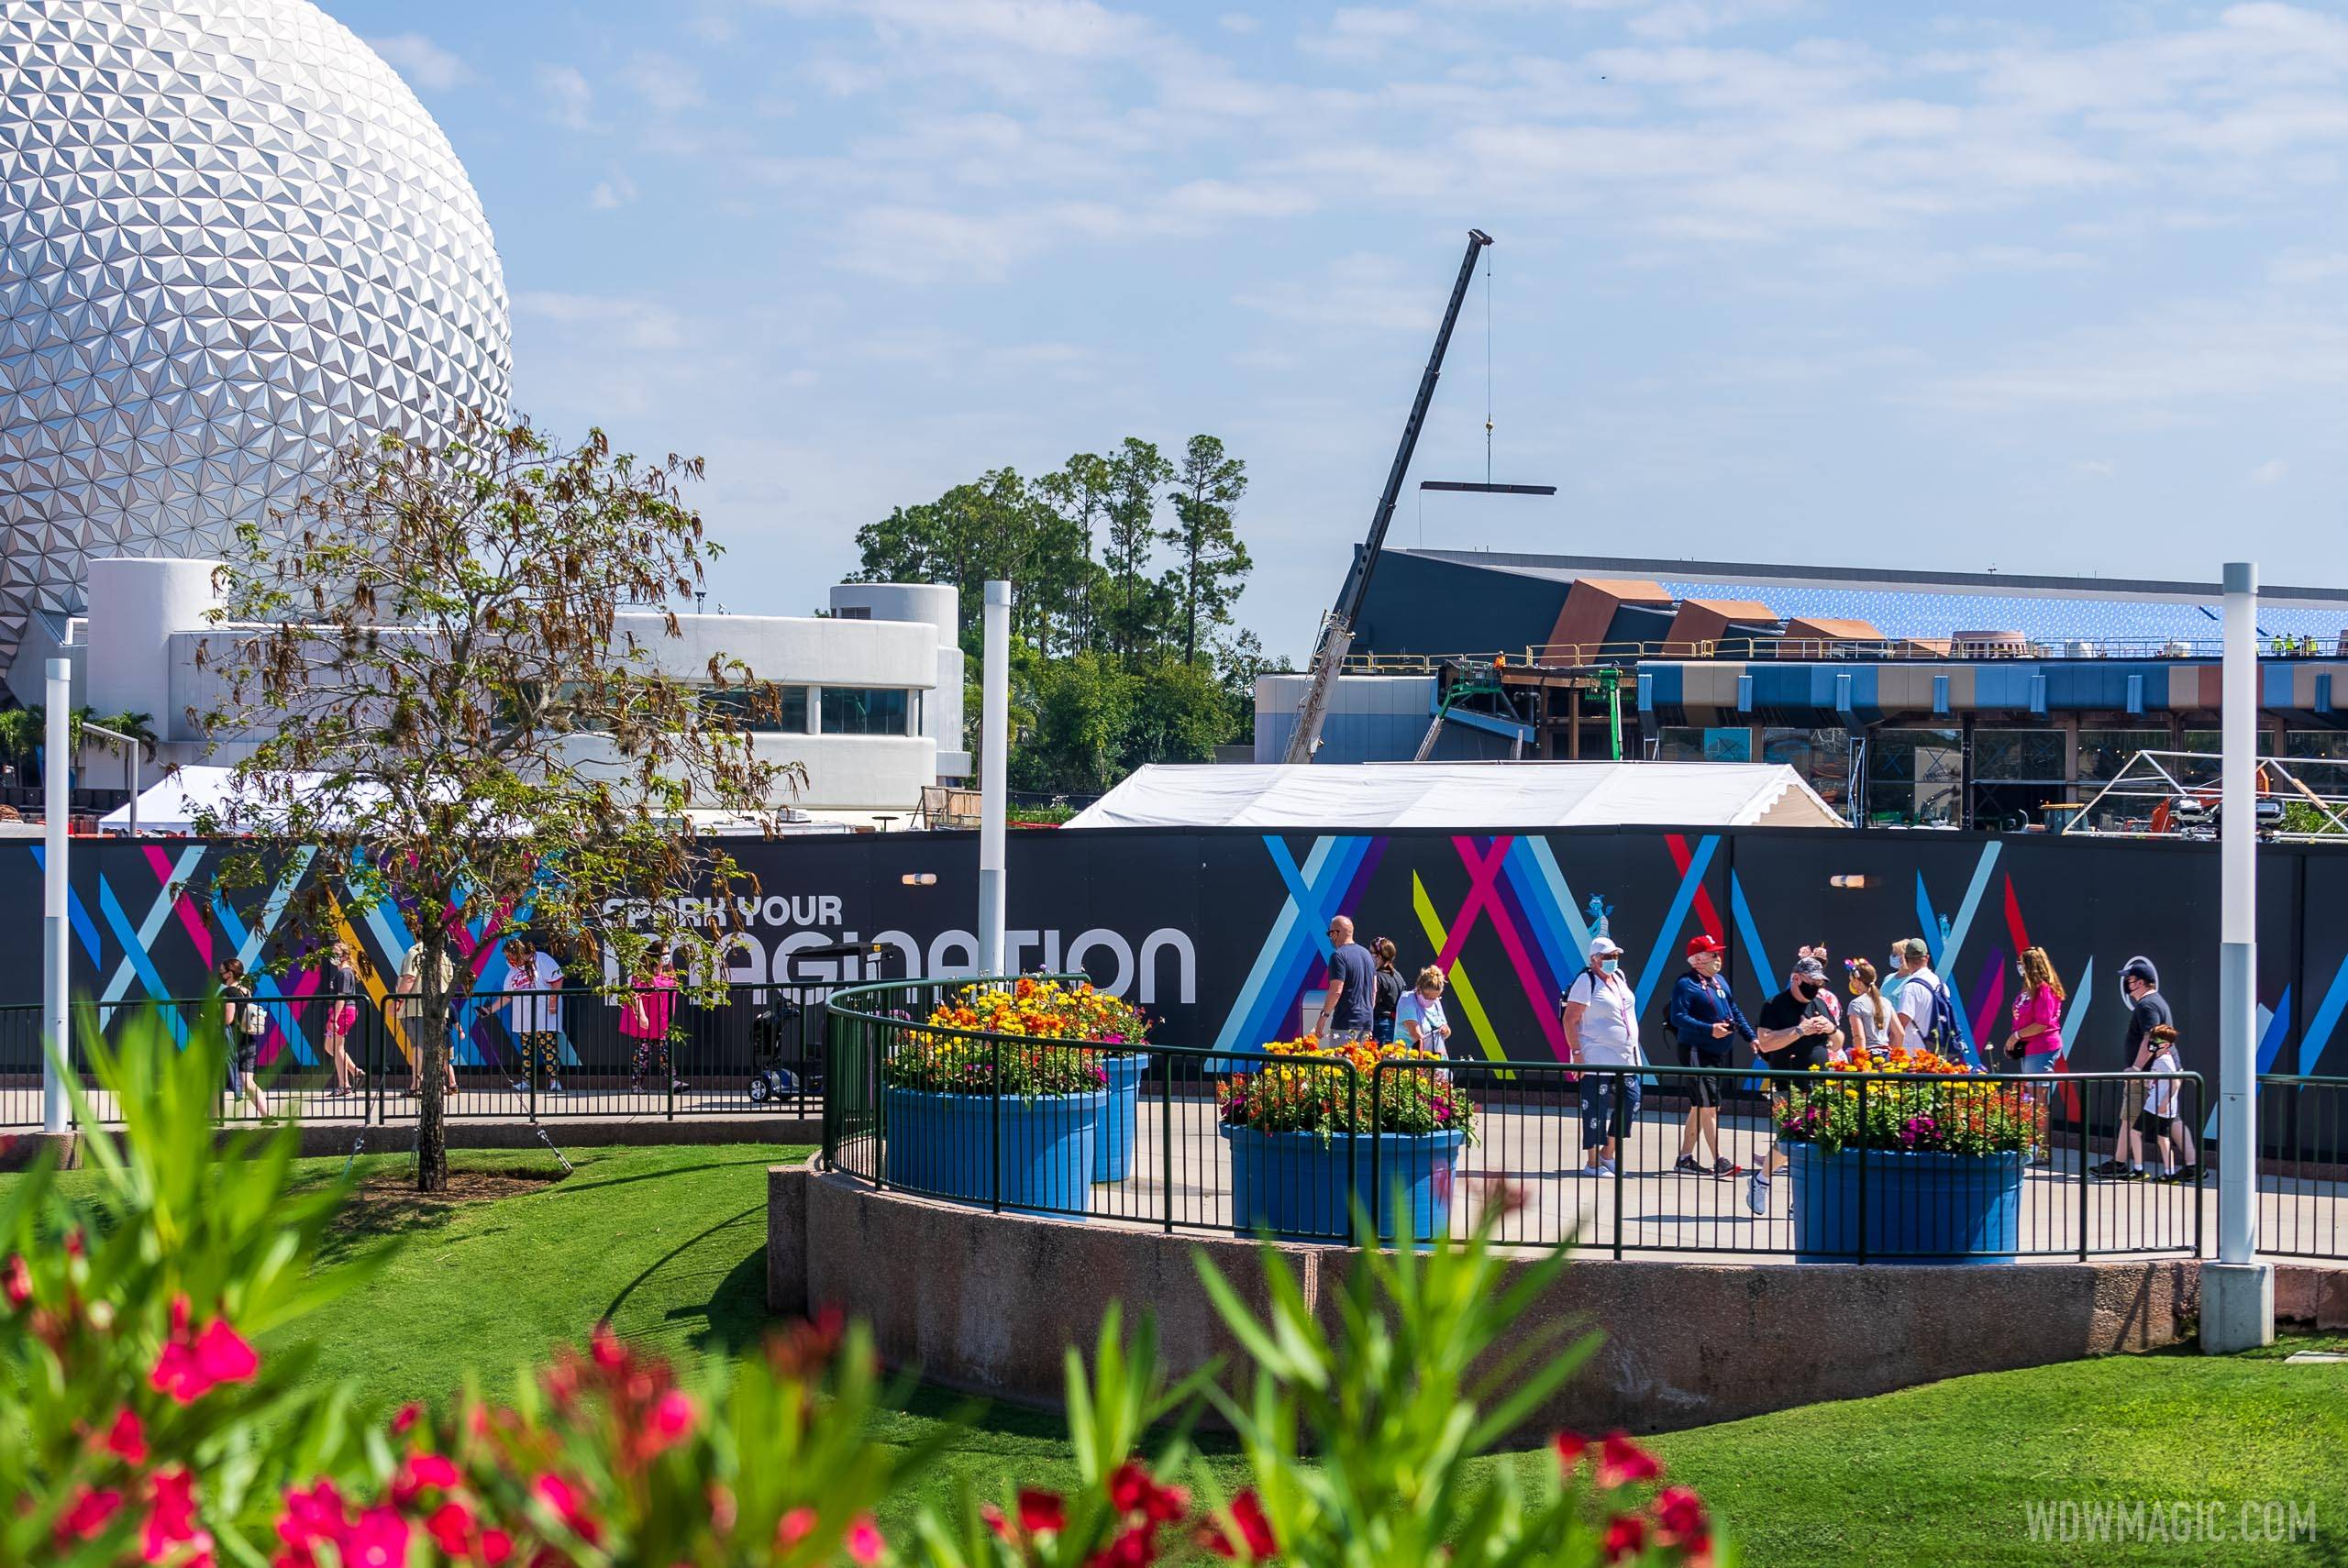 New beams installed in the former Innoventions East building at EPCOT